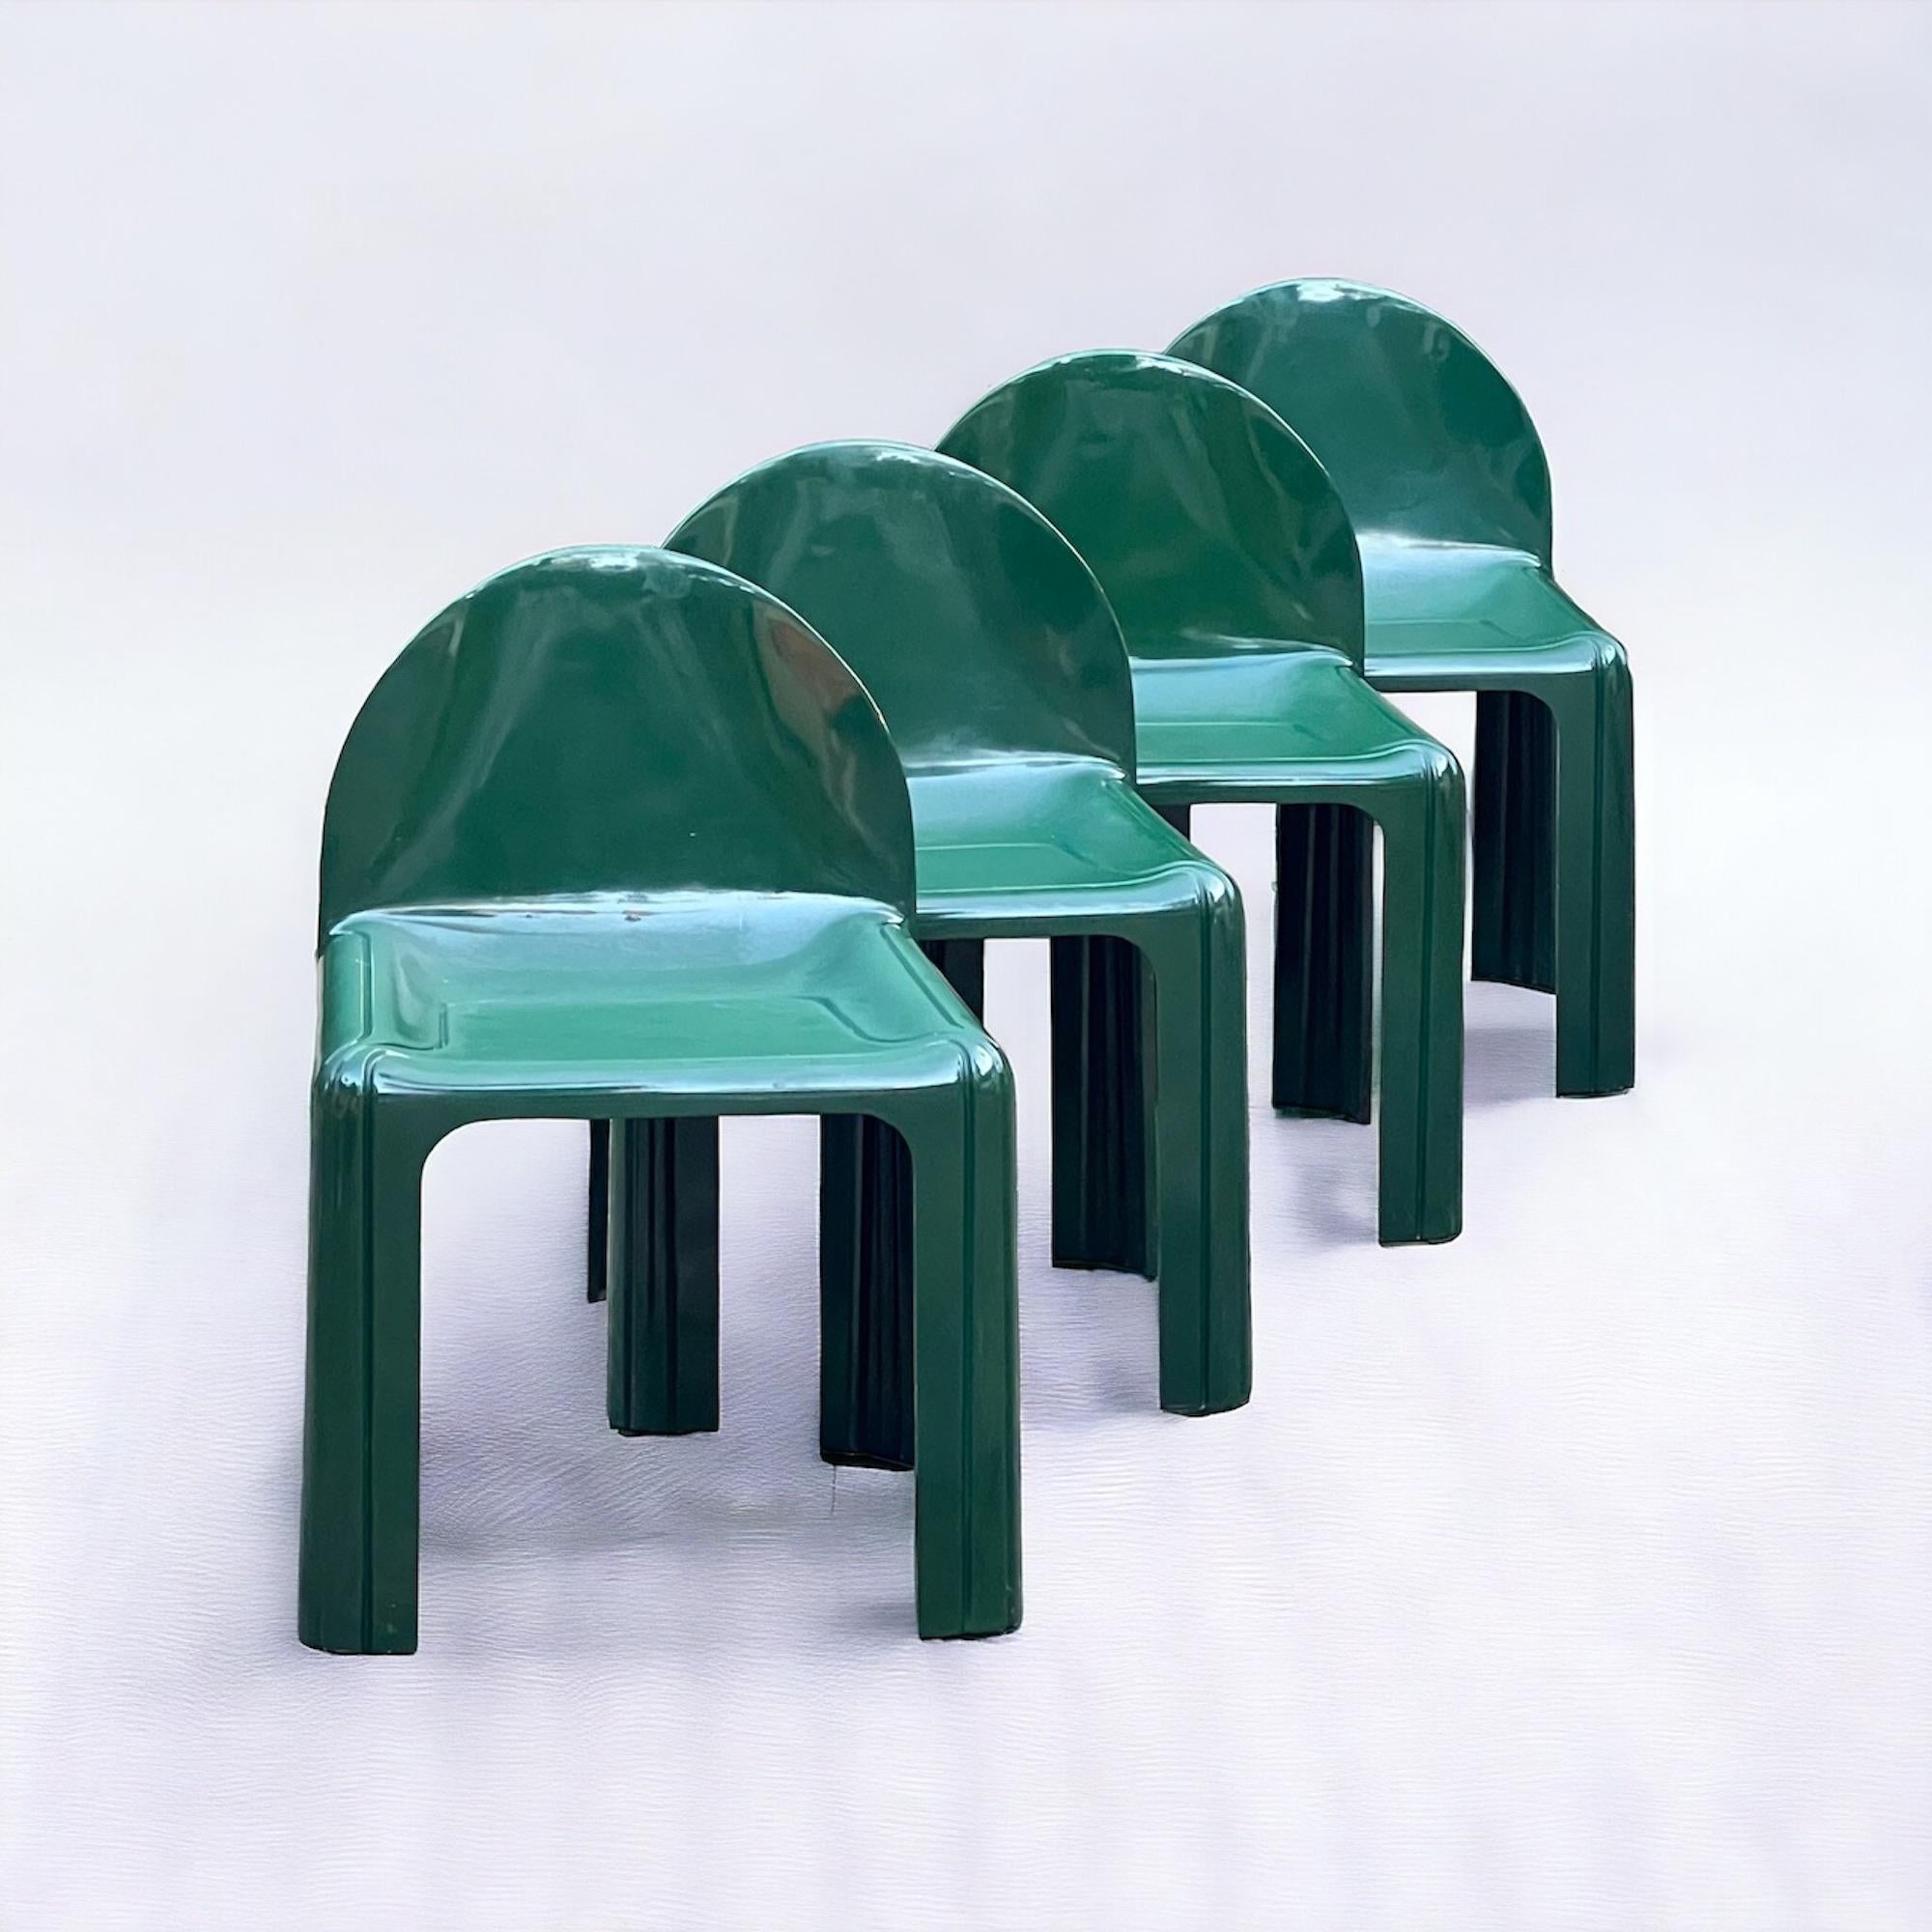 Set of 4 Green Resin Kartell Model 4854 Chairs by Gae Aulenti, 1960s For Sale 6